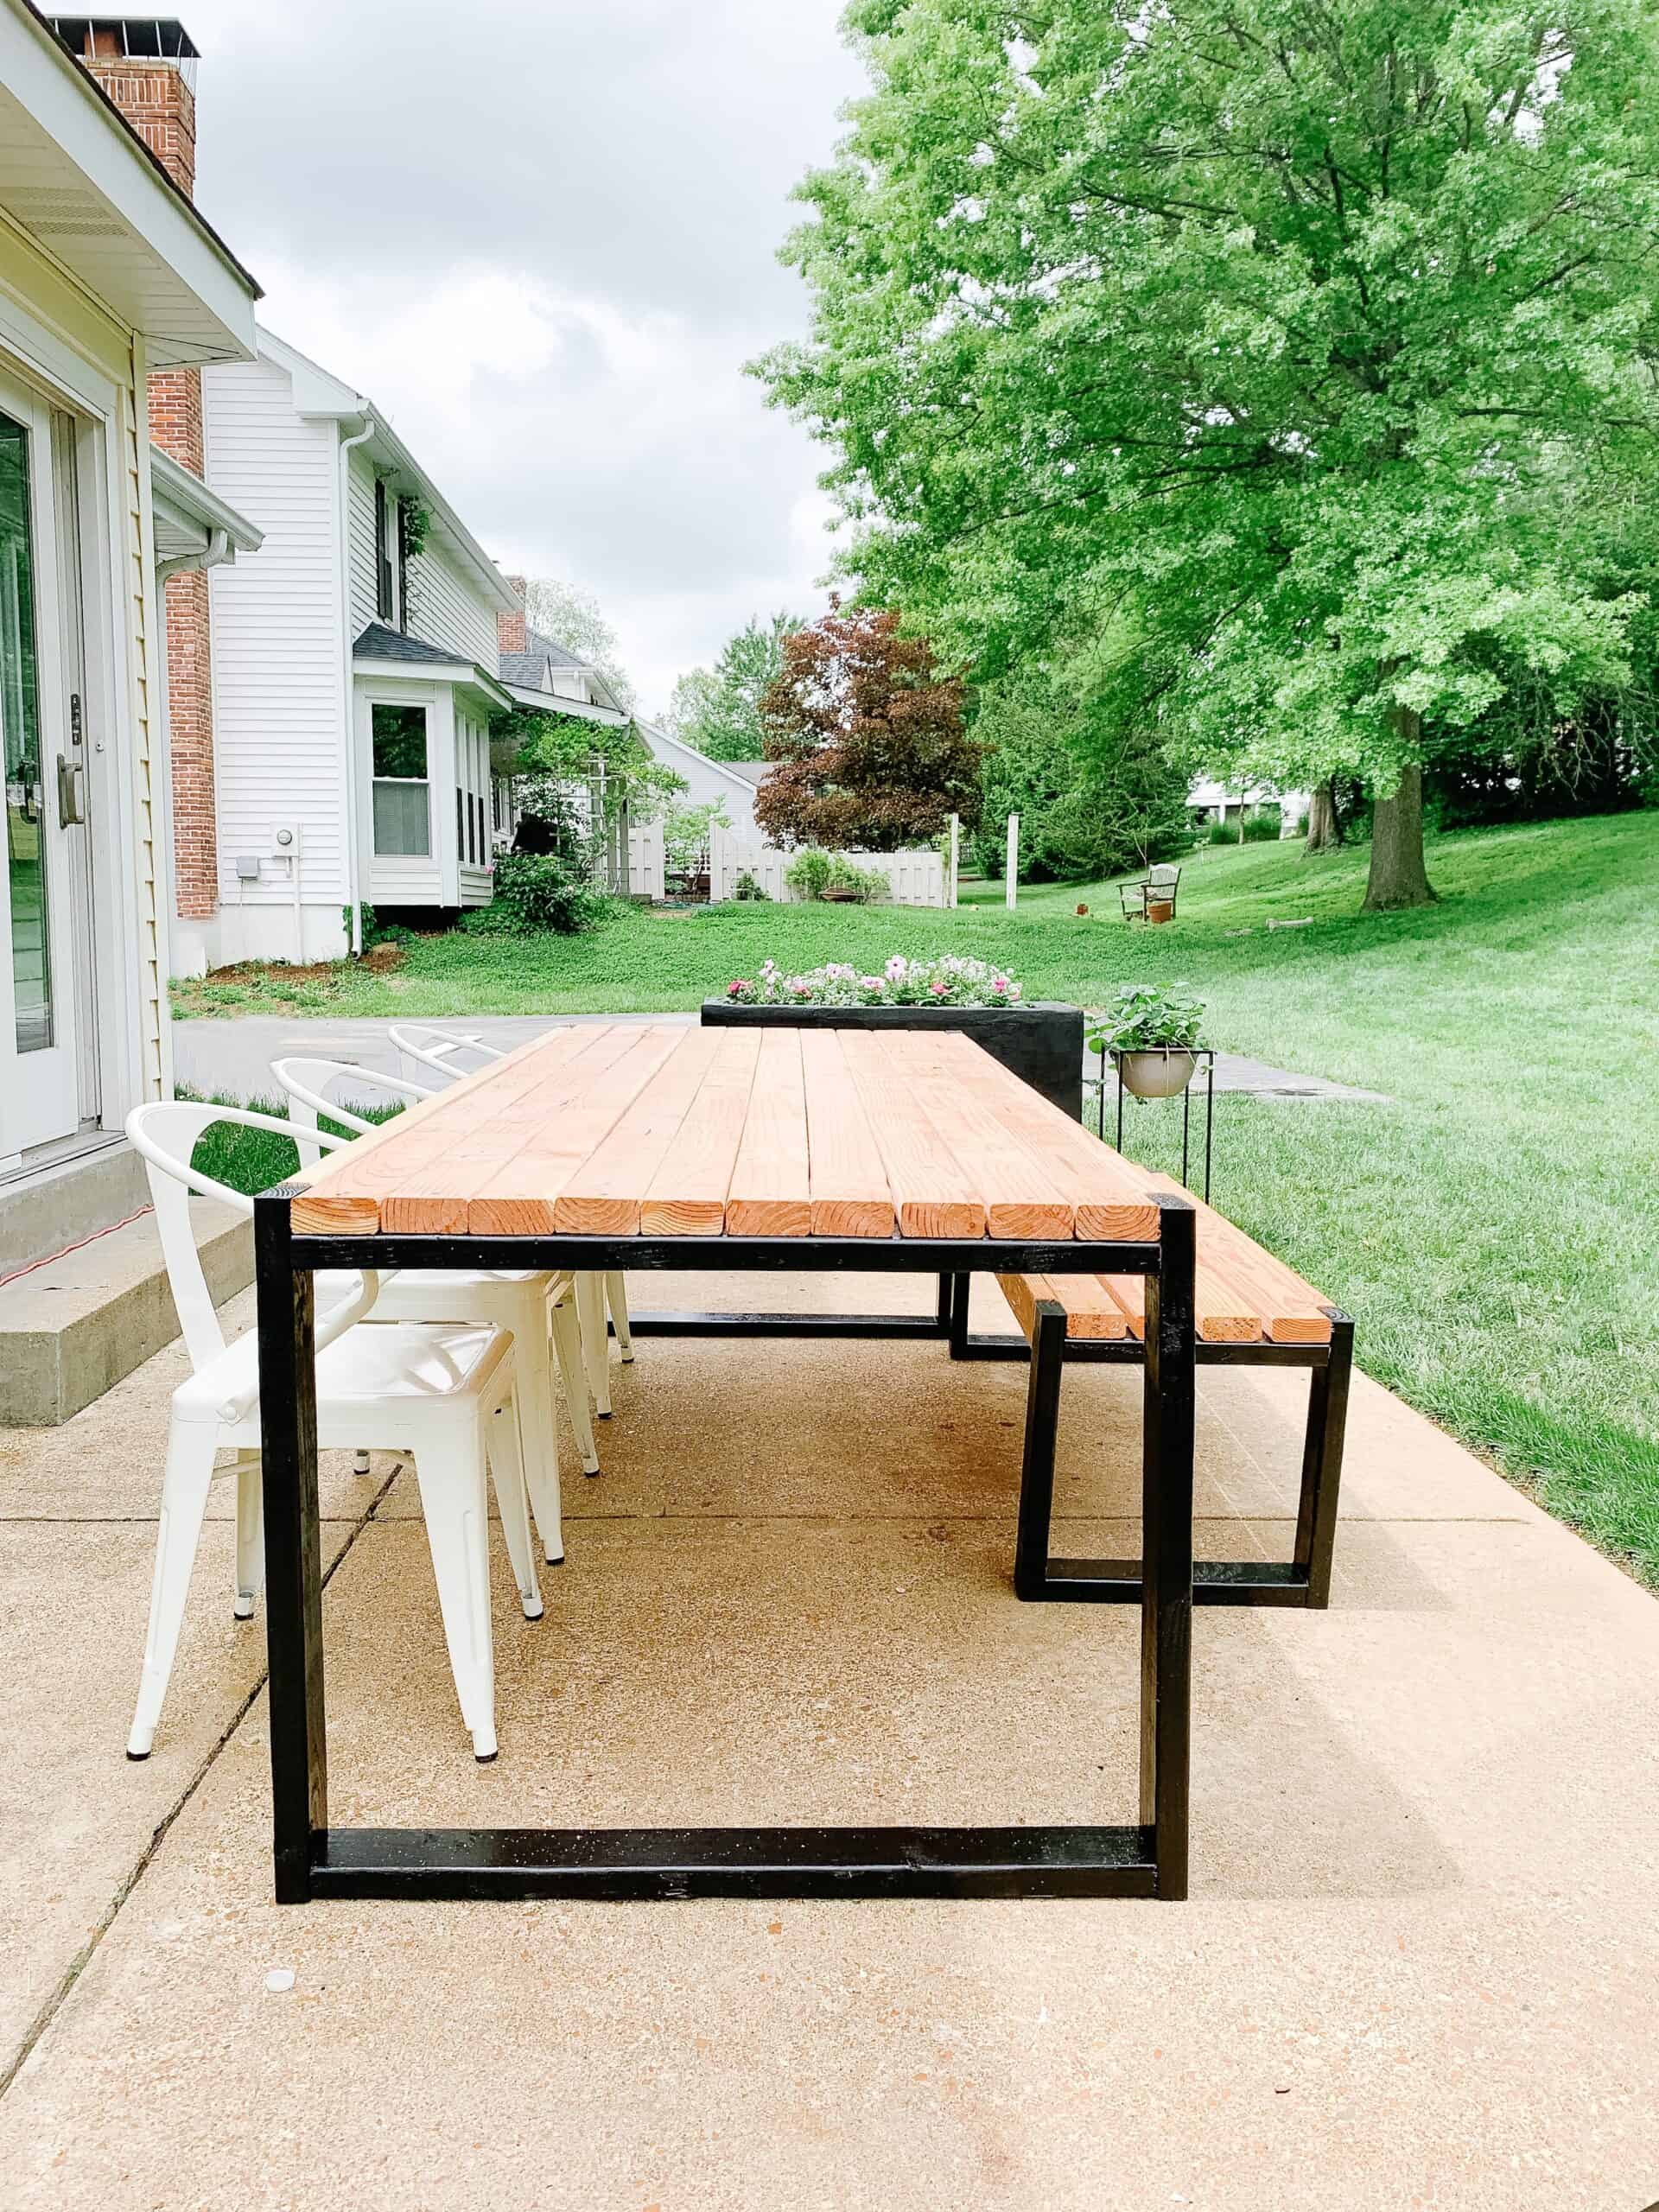 How to Seal Wooden Furniture When You Move it Outdoors